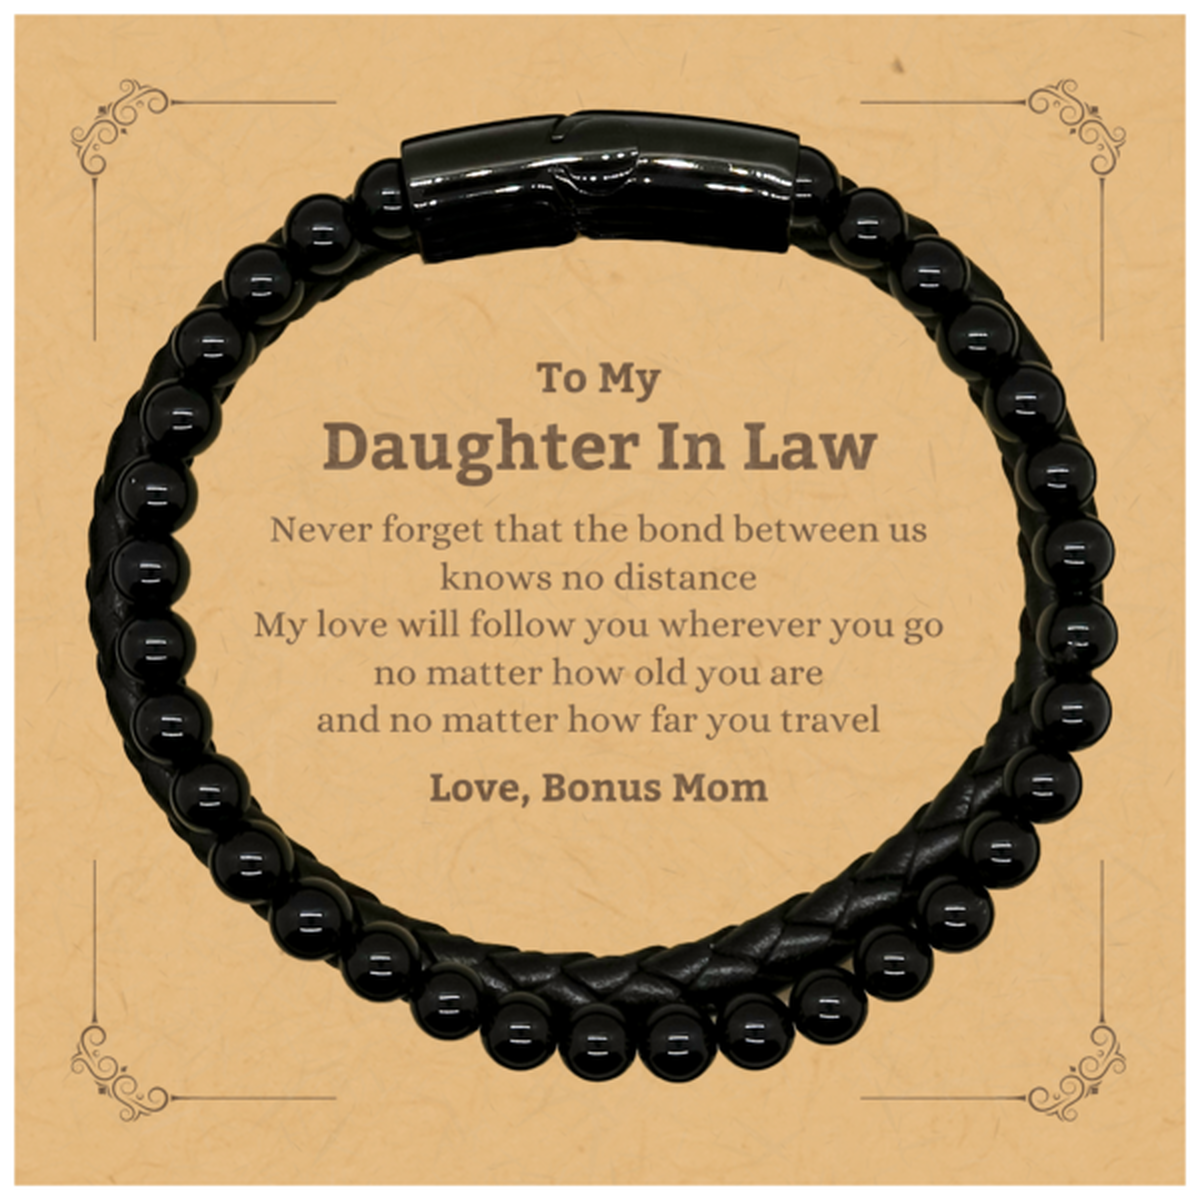 Daughter In Law Birthday Gifts from Bonus Mom, Adjustable Stone Leather Bracelets for Daughter In Law Christmas Graduation Unique Gifts Daughter In Law Never forget that the bond between us knows no distance. Love, Bonus Mom